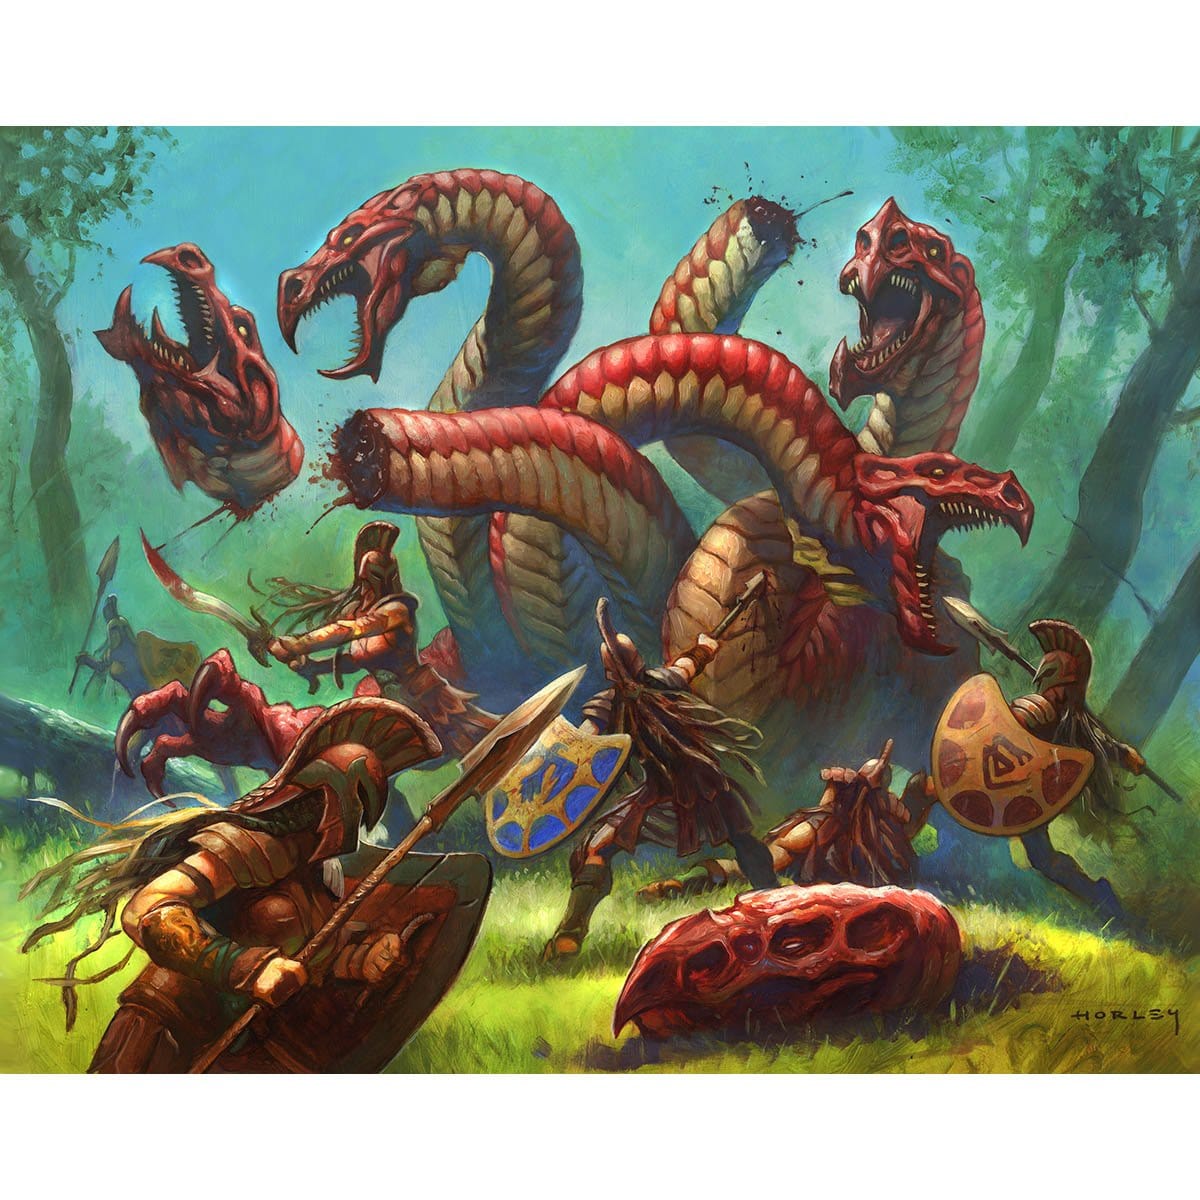 Lifeblood Hydra Print - Print - Original Magic Art - Accessories for Magic the Gathering and other card games